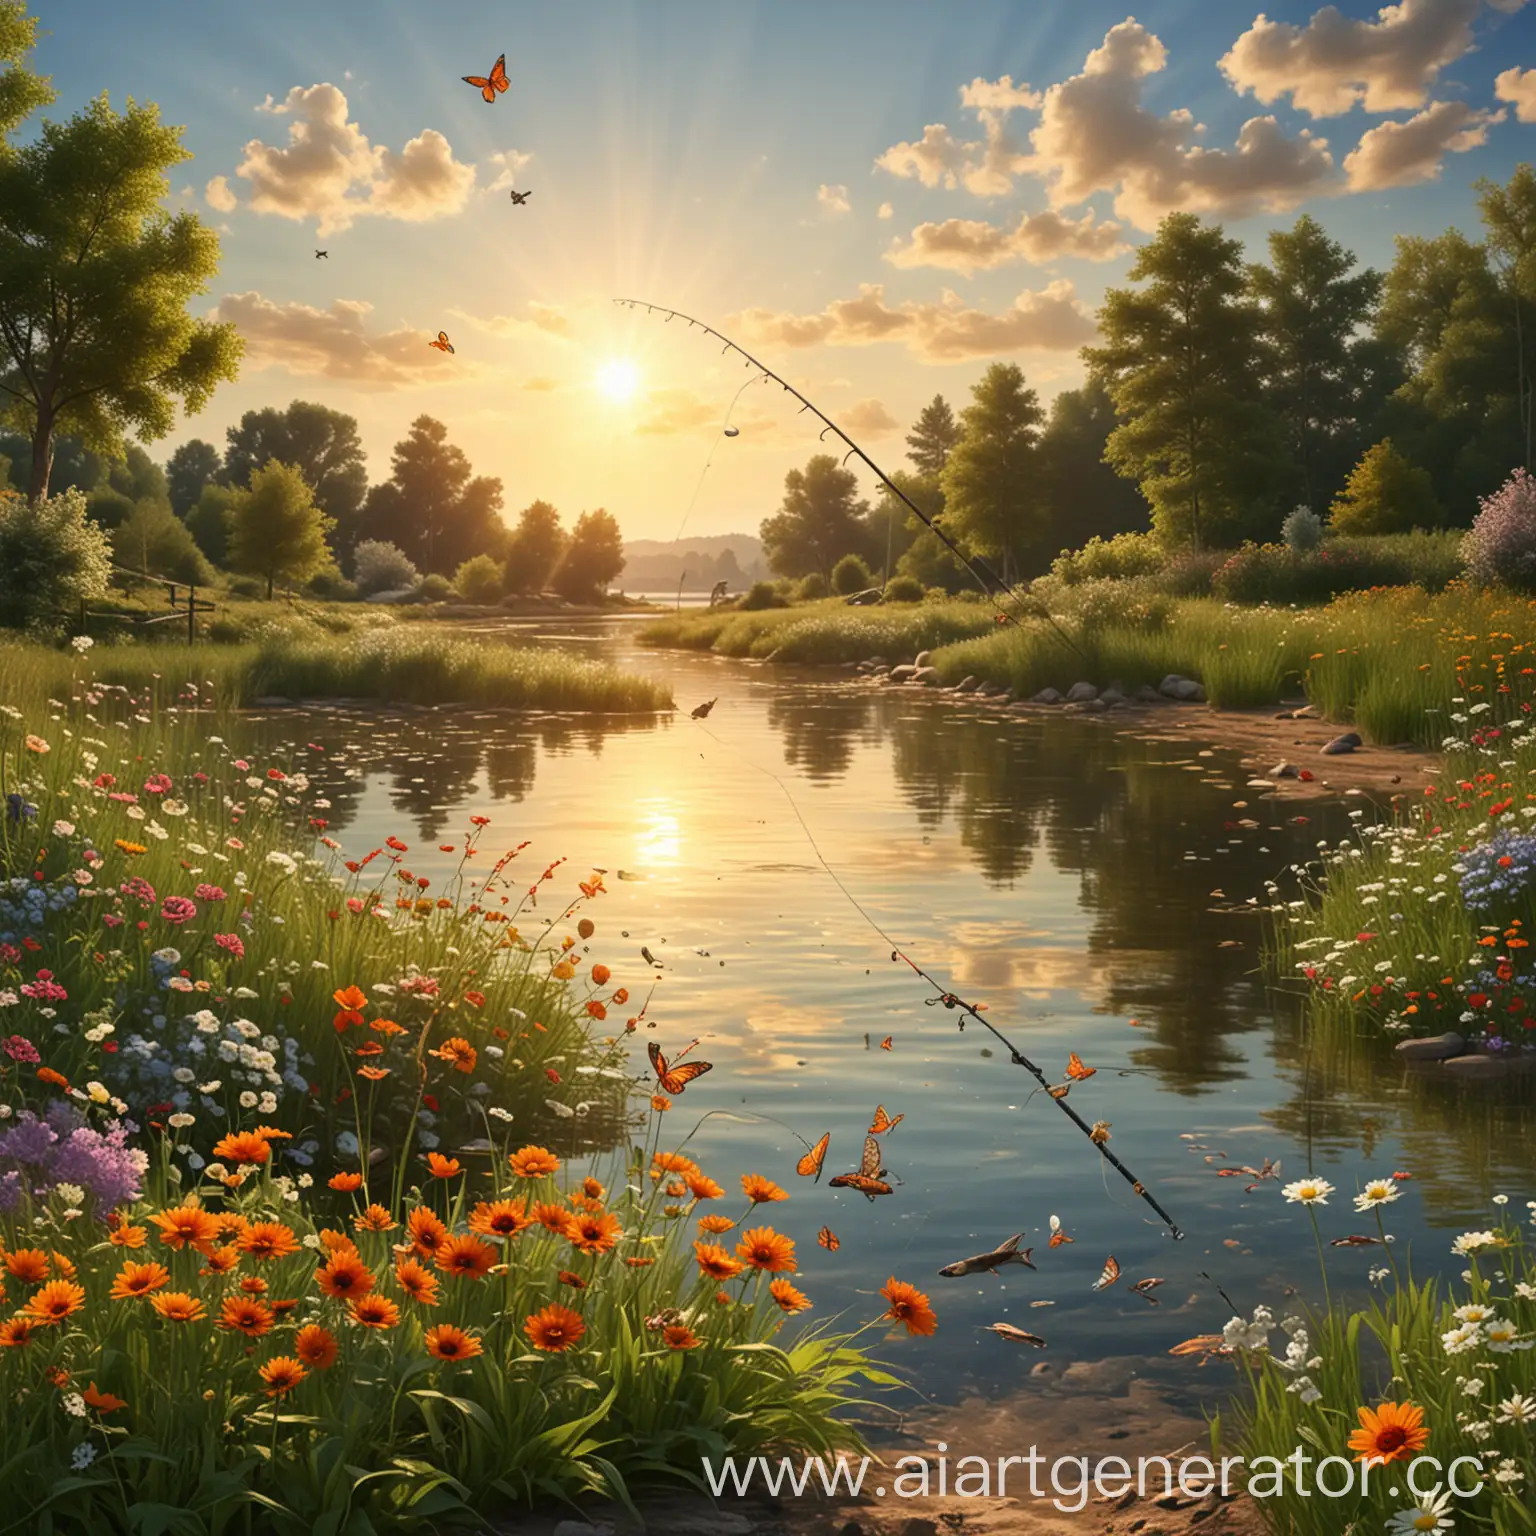 Tranquil-Summer-Scene-with-Fishing-Rod-Fish-and-Butterflies